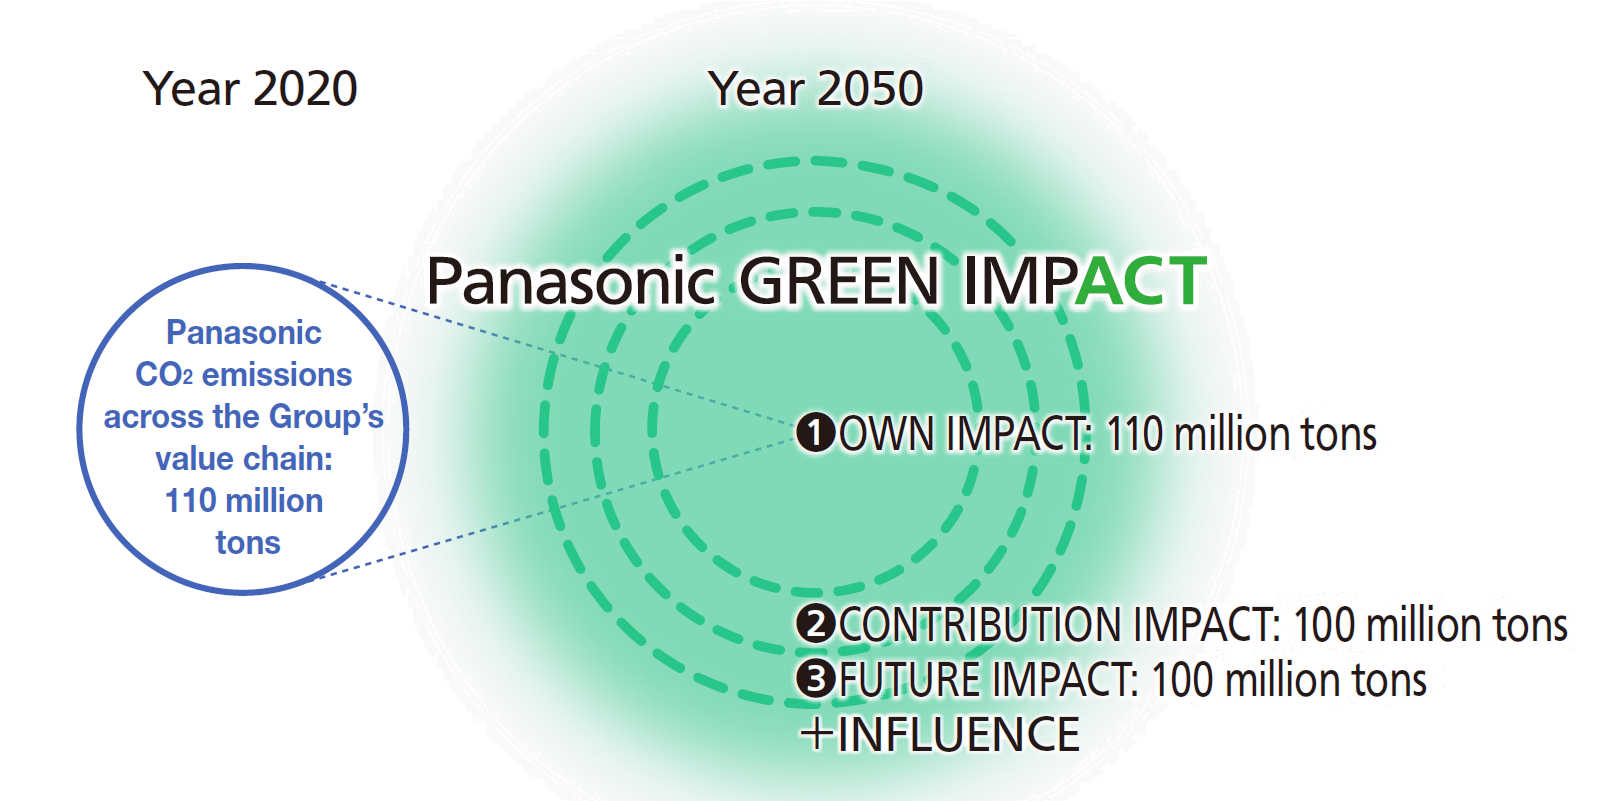 Panasonic GREEN IMPACT To realize 'a better life' and 'a more sustainable global environment', the Panasonic Group will strive to achieve carbon neutrality together with society, by increasing impacts from various actions that will contribute to reduce CO? emissions of our own and of various fields of society.